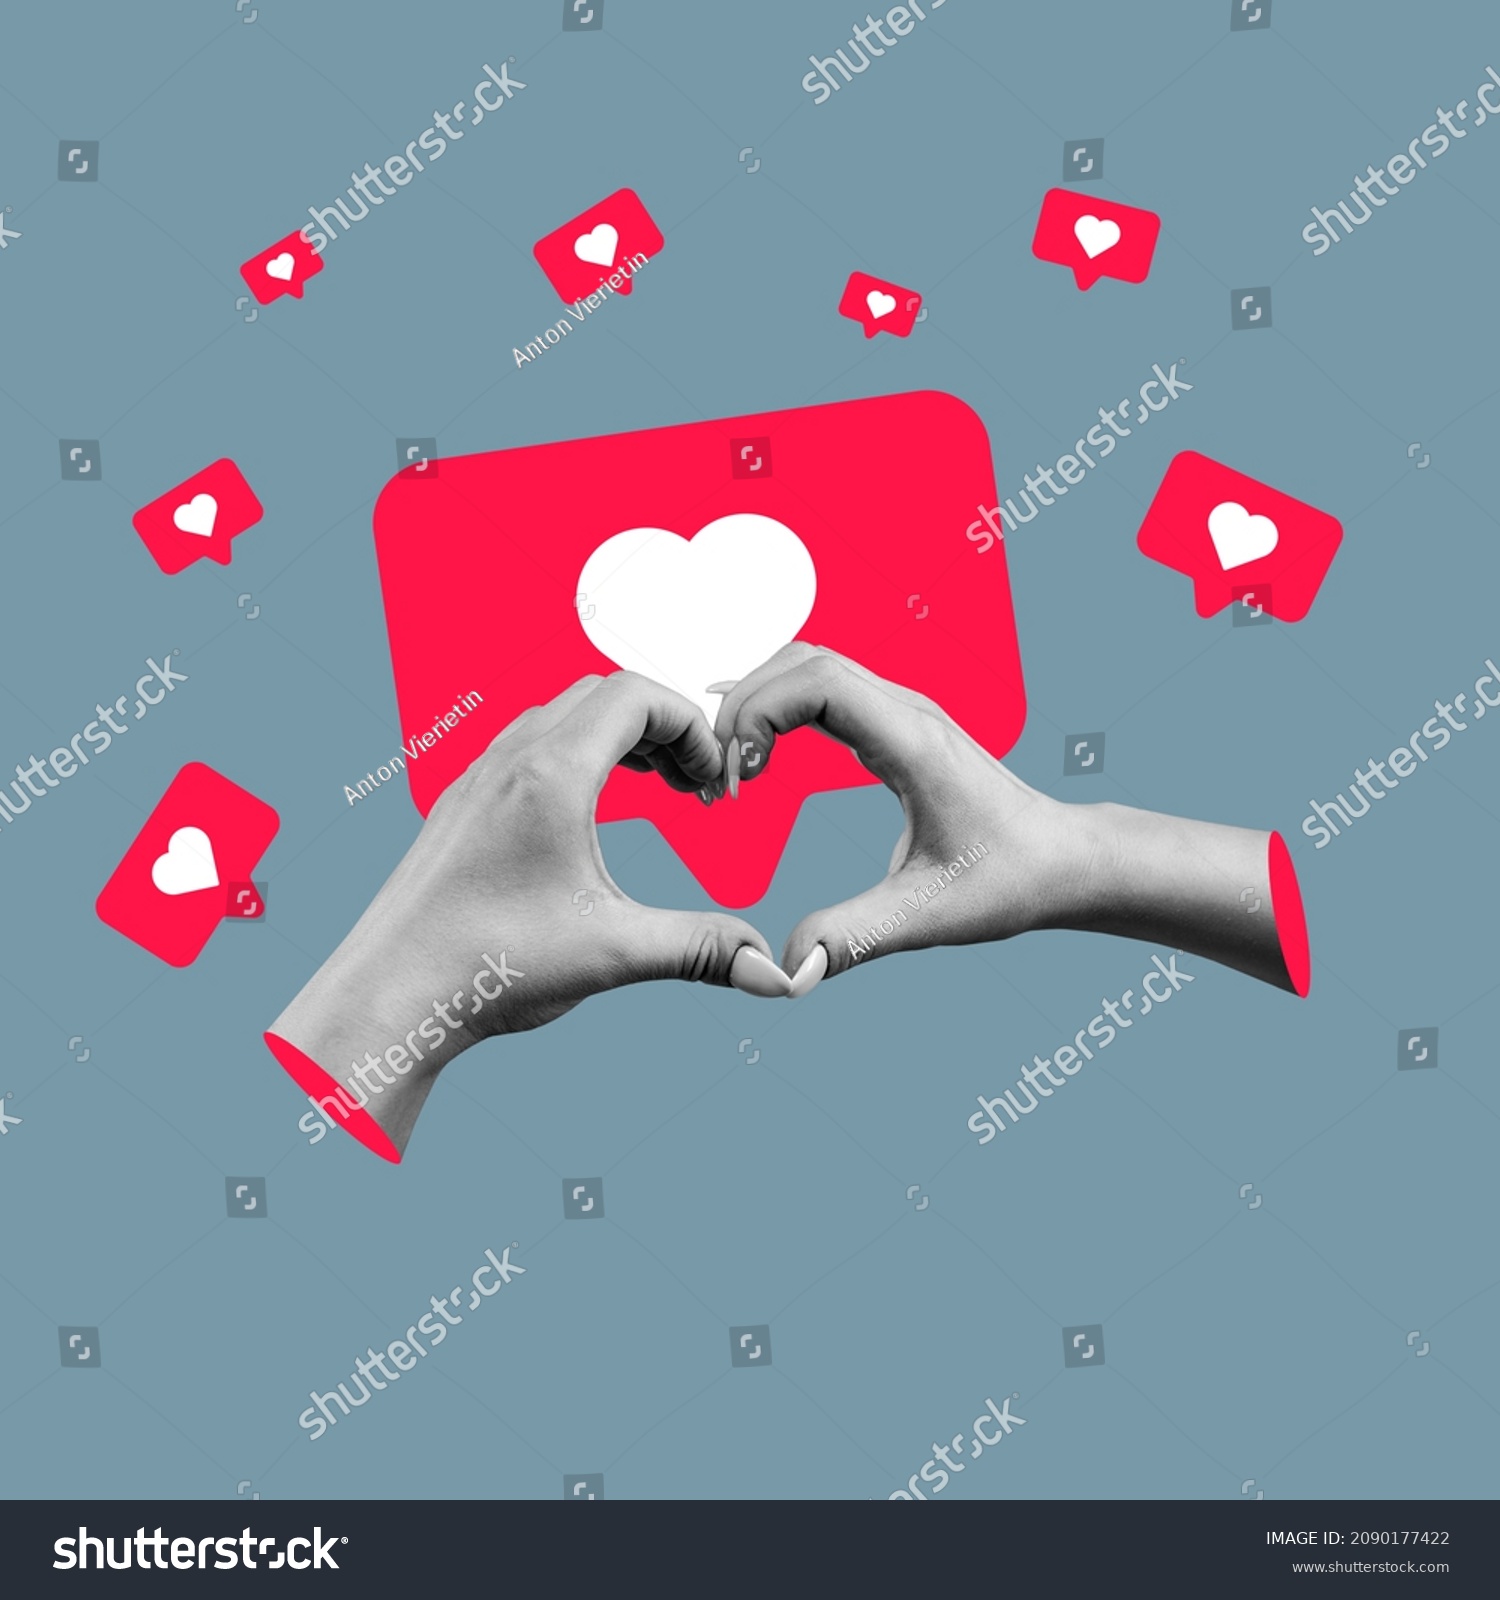 Social media like icons. Contemporary art collage of hands making heart shape isolated over gray background. Concept of social meadia addiction, popularity, influence, modern lifestyle and ad #2090177422